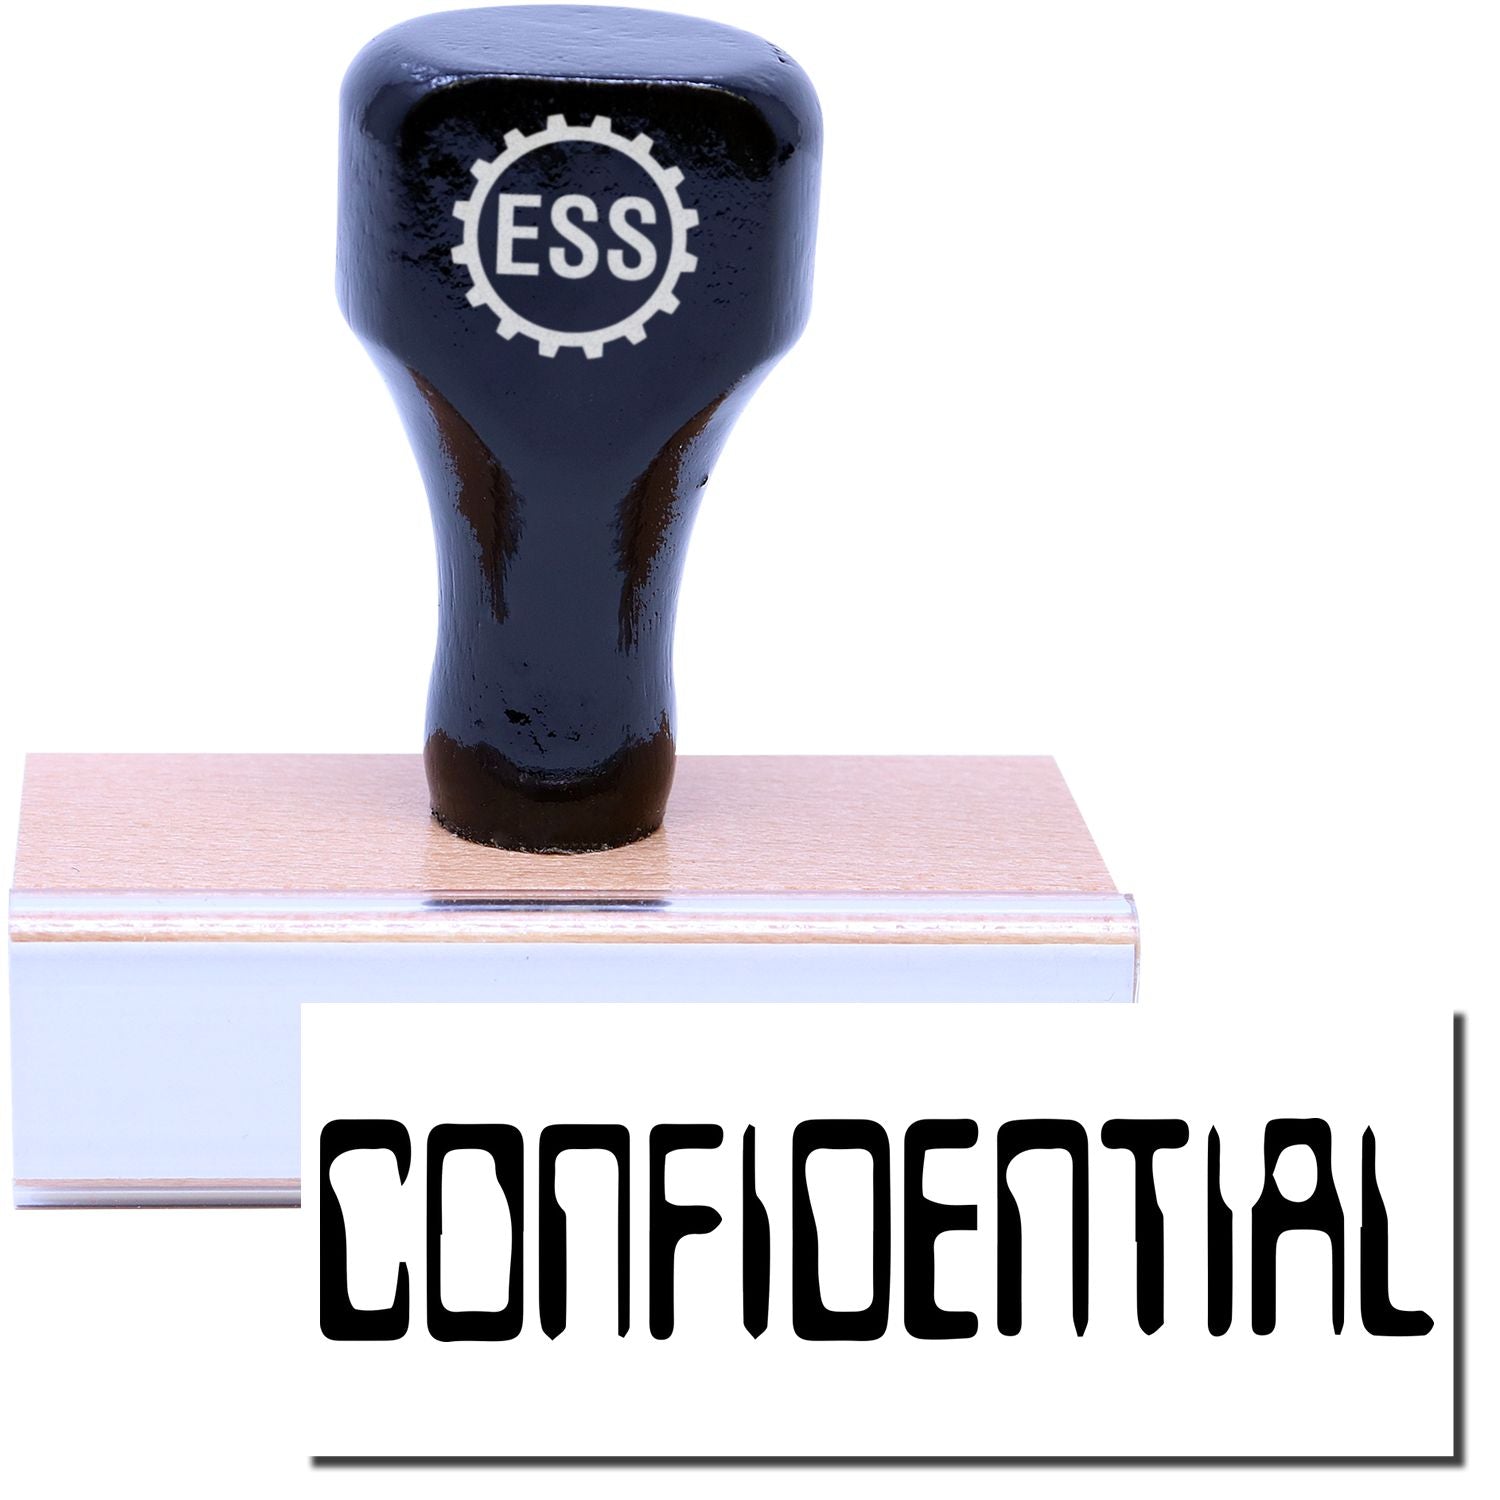 A stock office rubber stamp with a stamped image showing how the text "CONFIDENTIAL" in a barcode font is displayed after stamping.